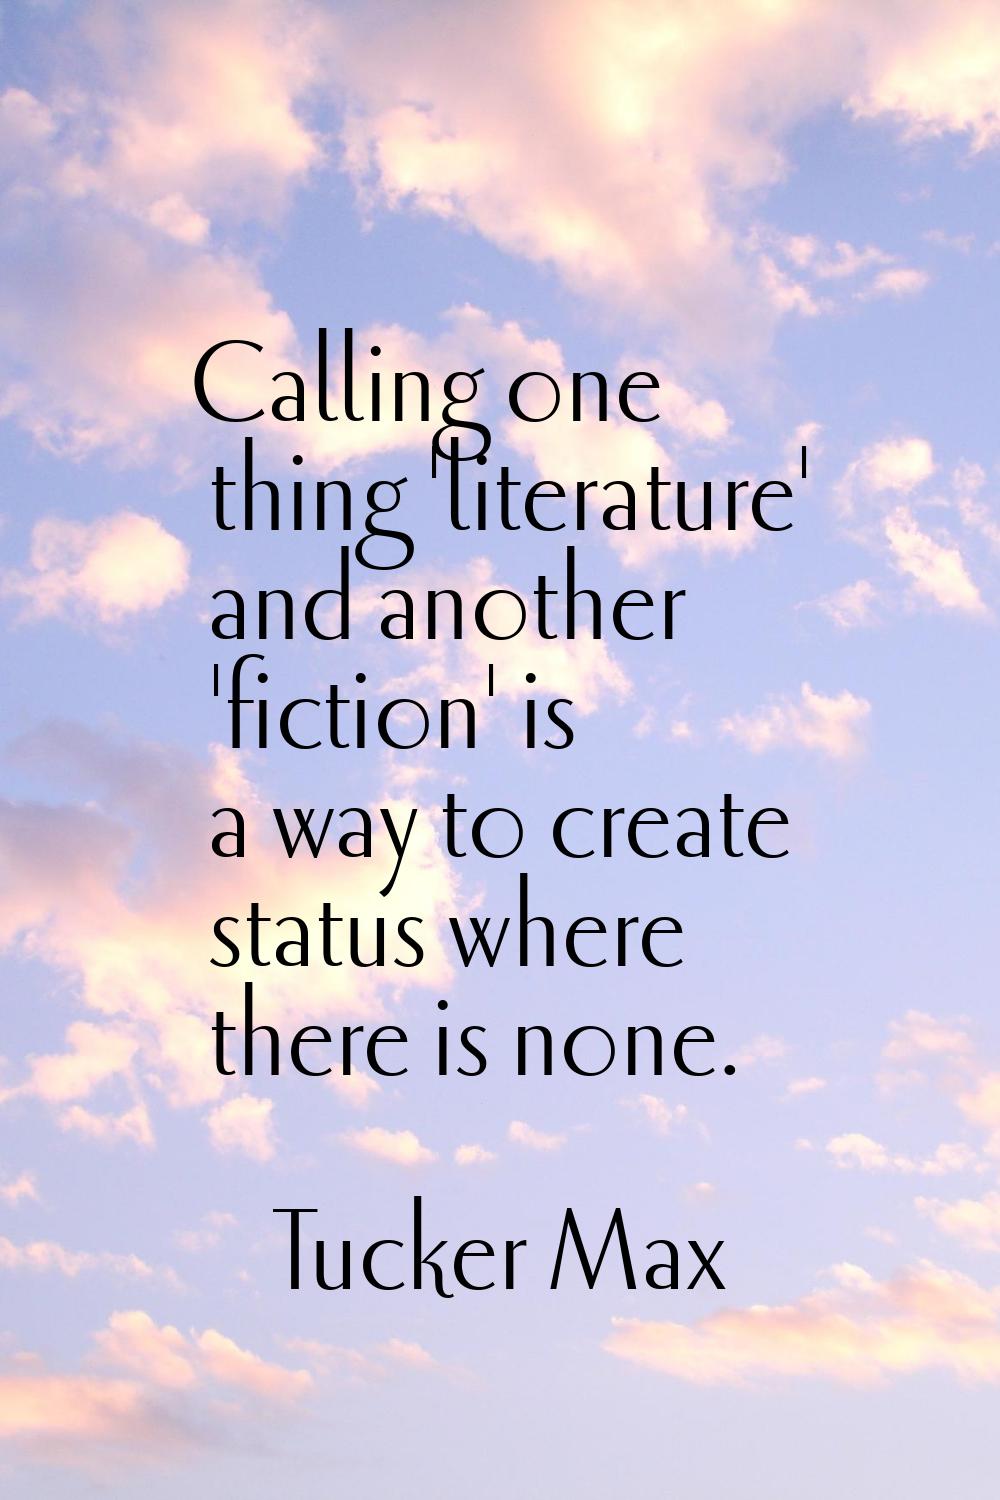 Calling one thing 'literature' and another 'fiction' is a way to create status where there is none.